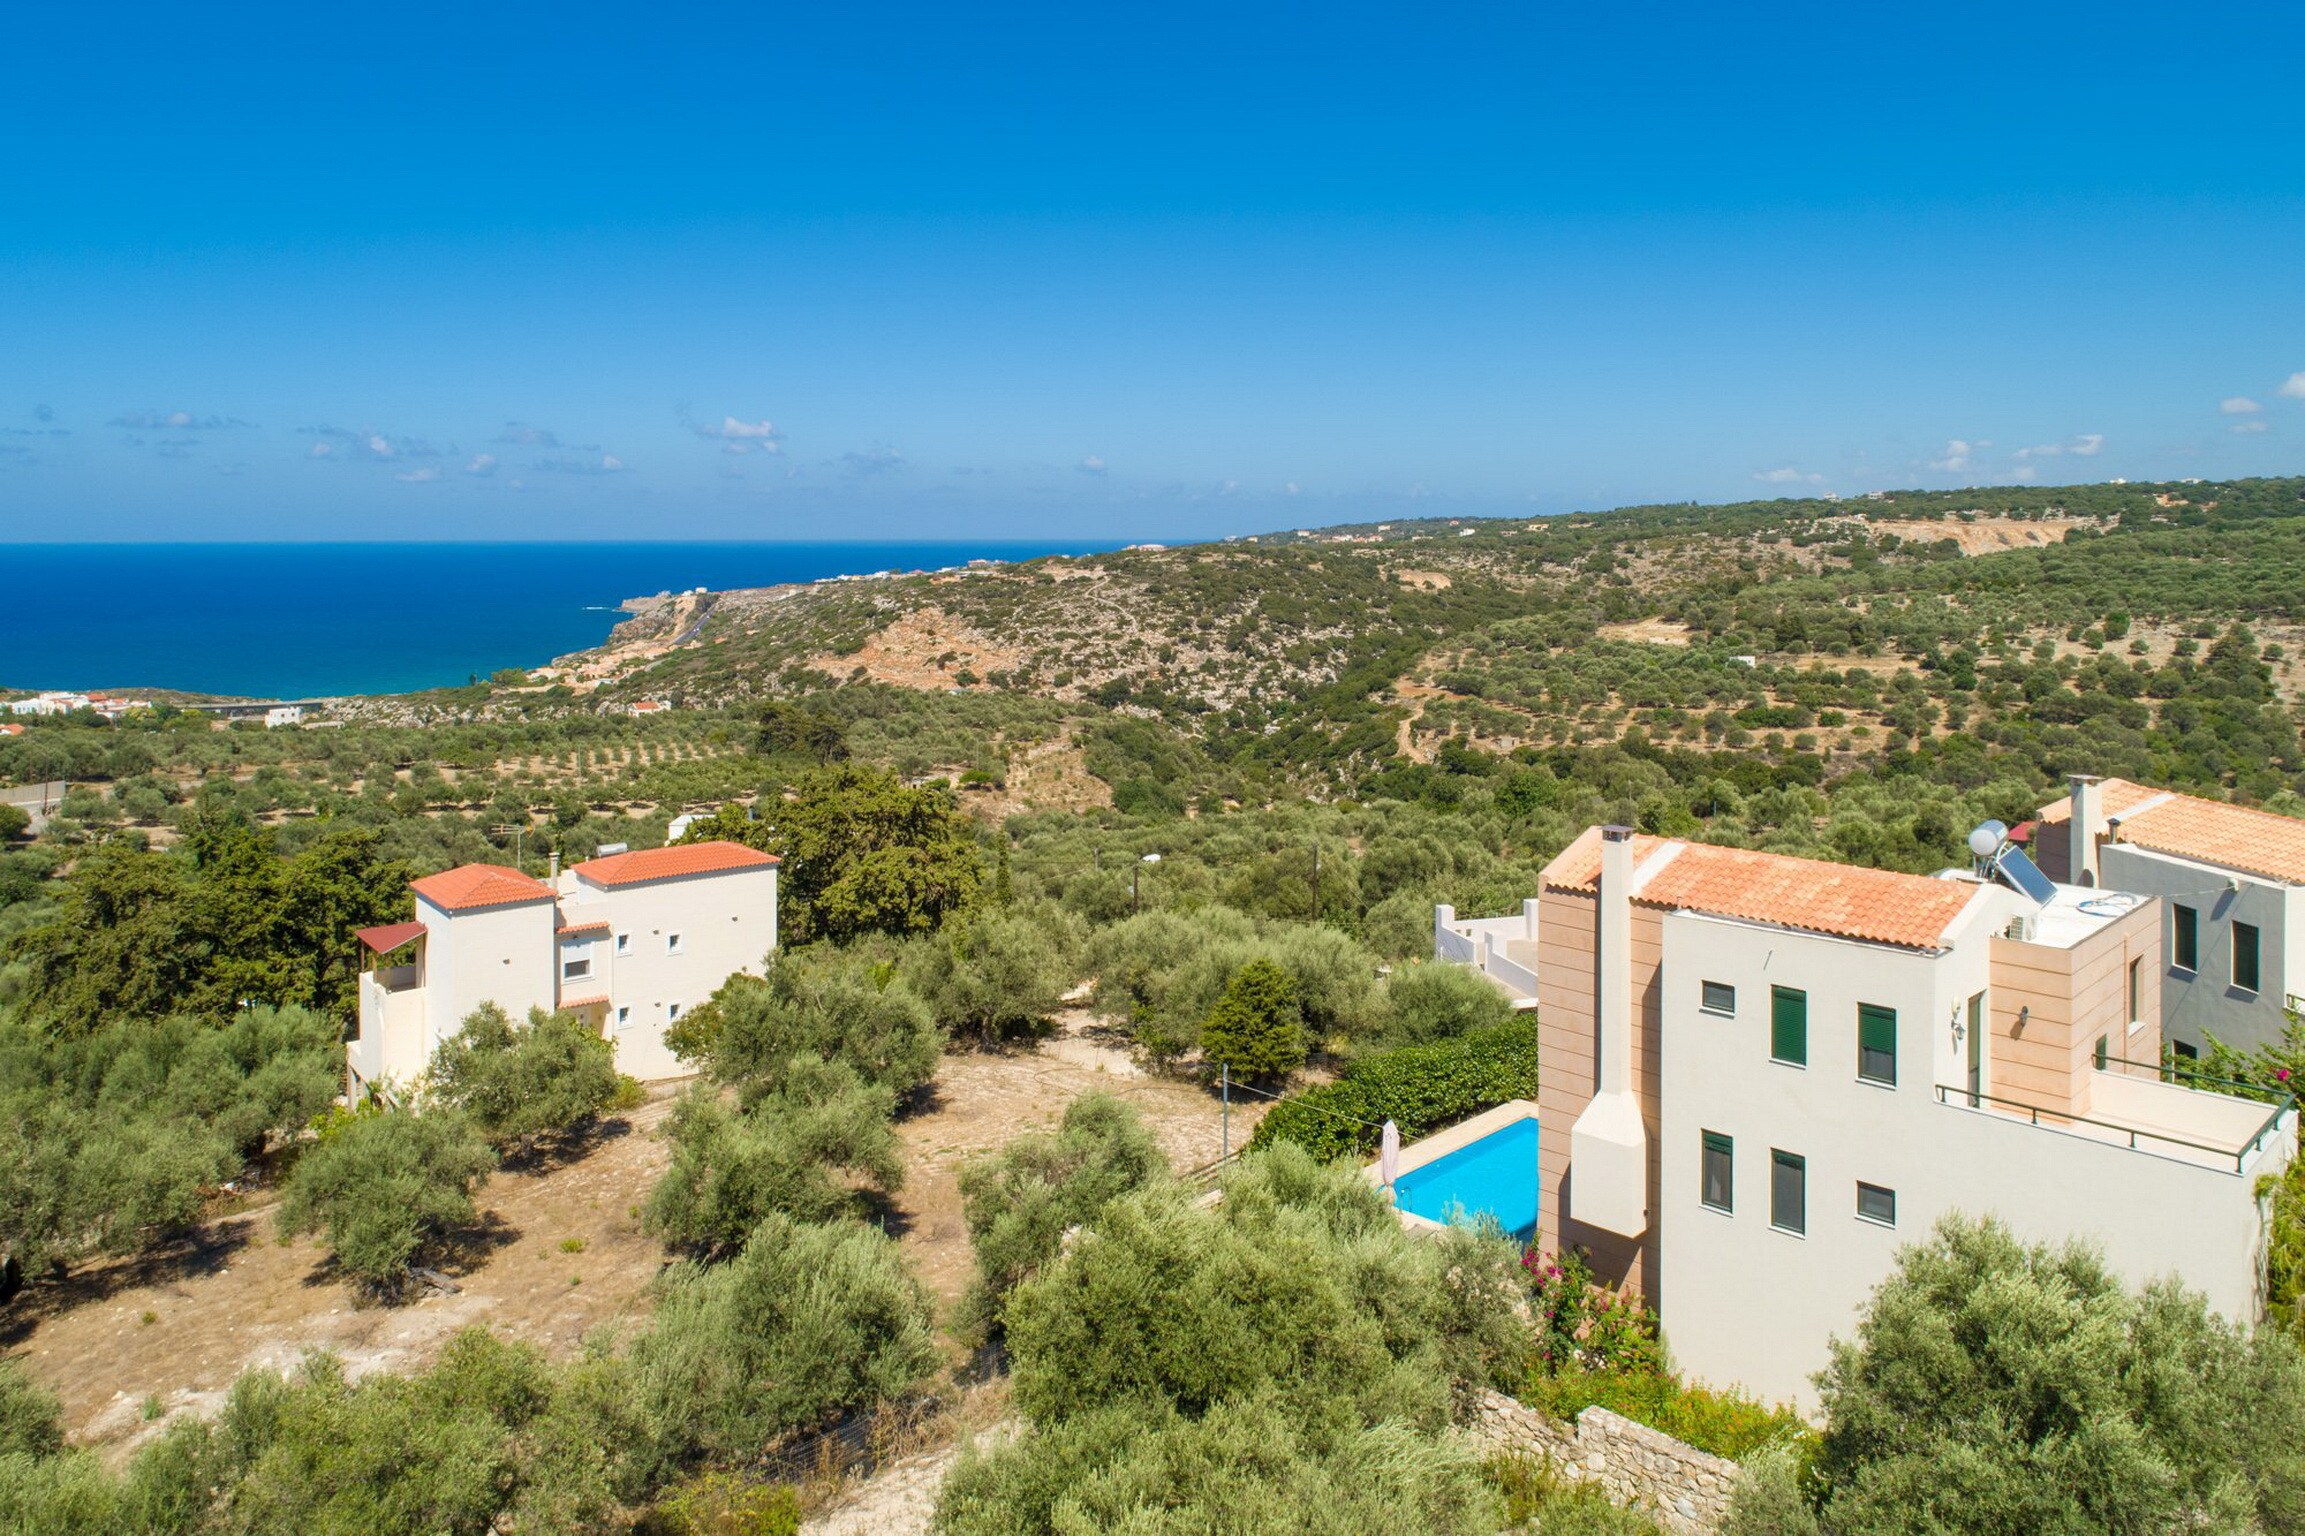 Bird's eye view of Panoramic view large villa,private pool,near taverns